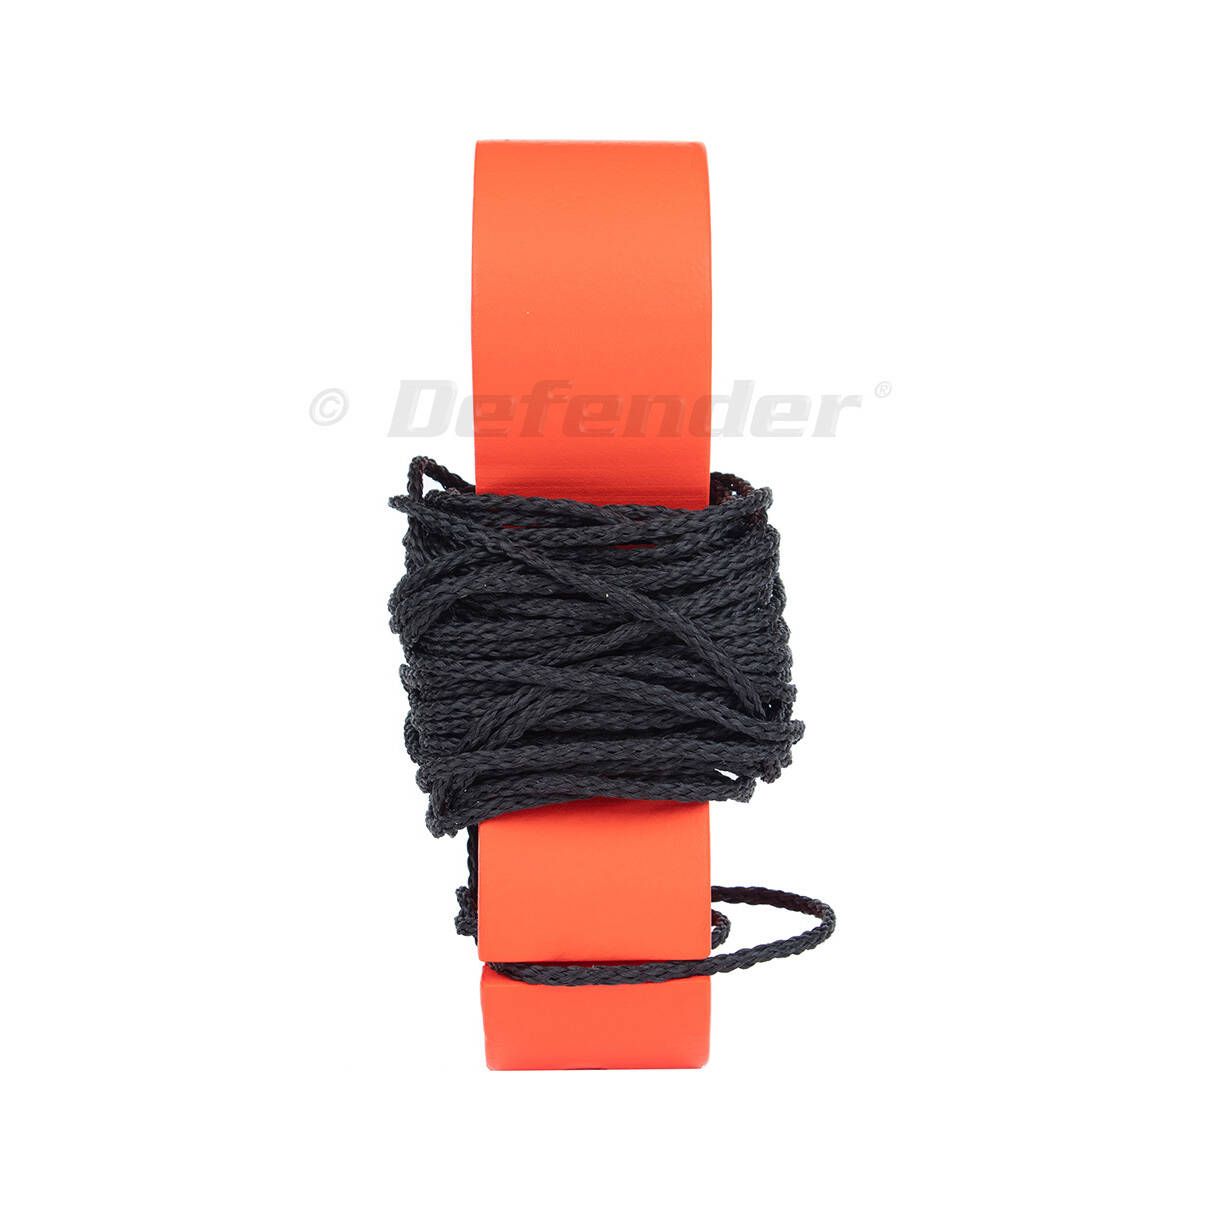 Jim-Buoy Anchor Trip Line with Marker Buoy - 1204